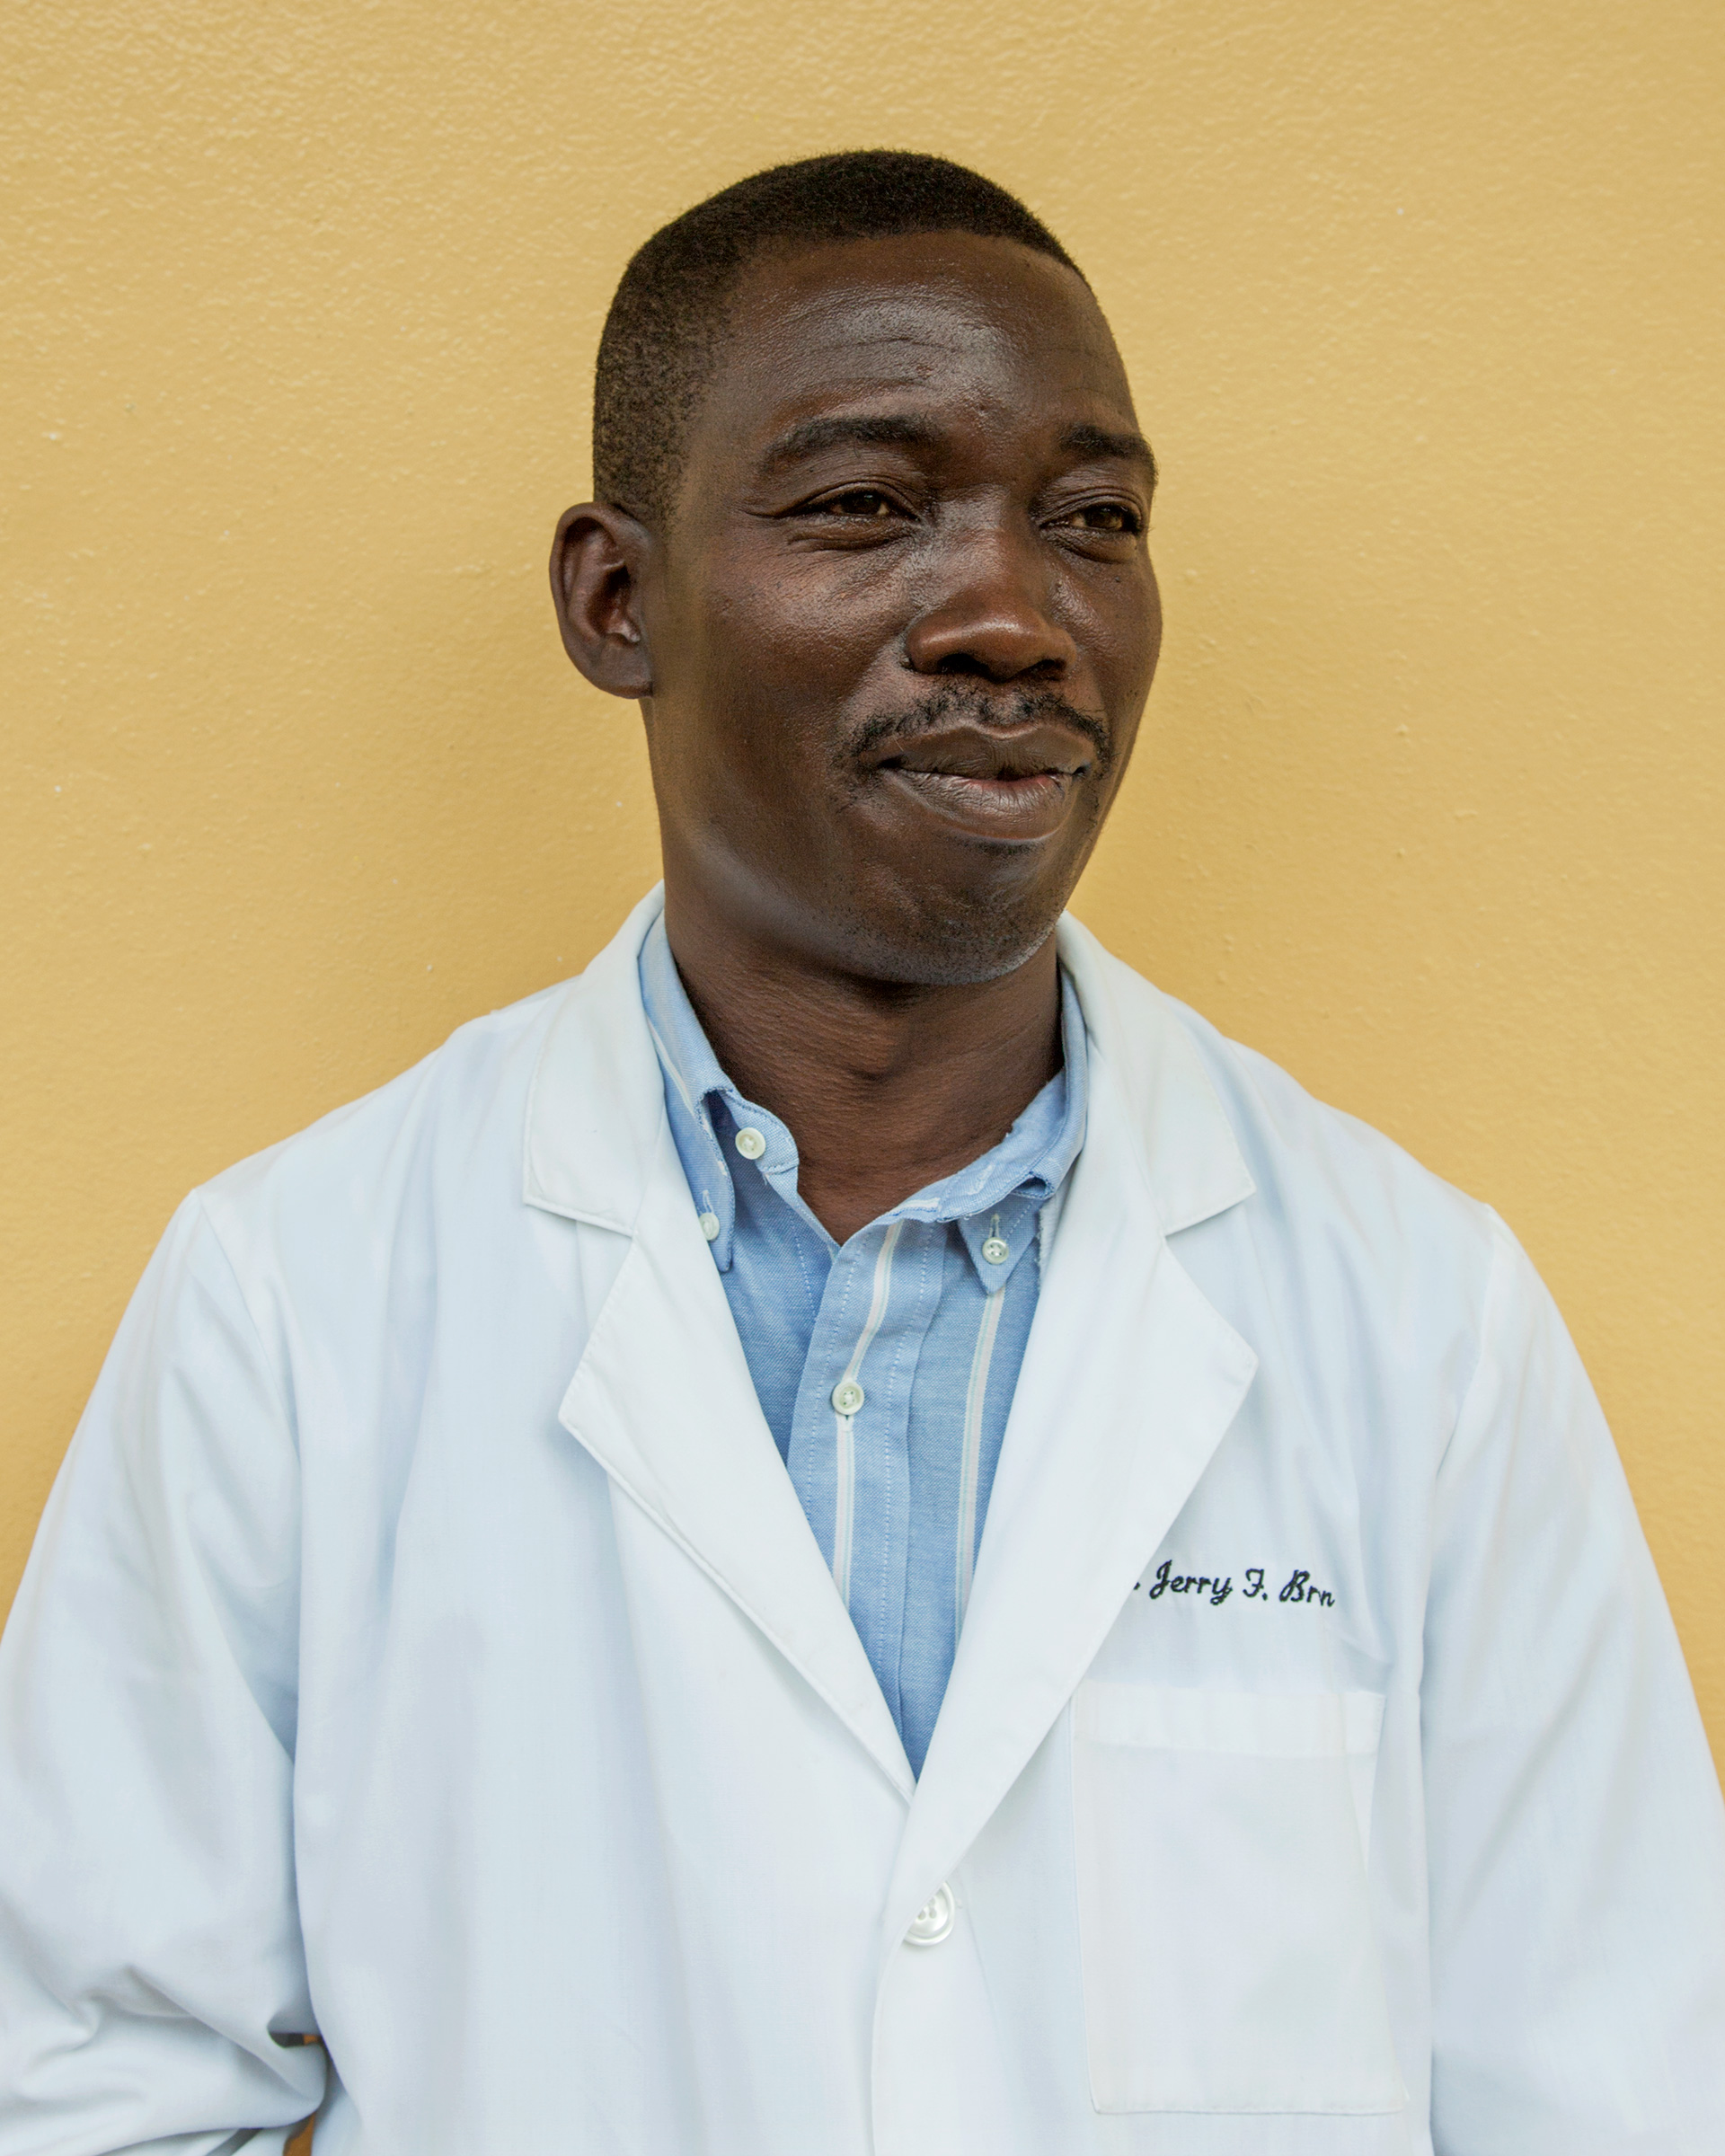 A portrait of Jerry Brown, CEO of JFK Medical Center in Monrovia, Liberia